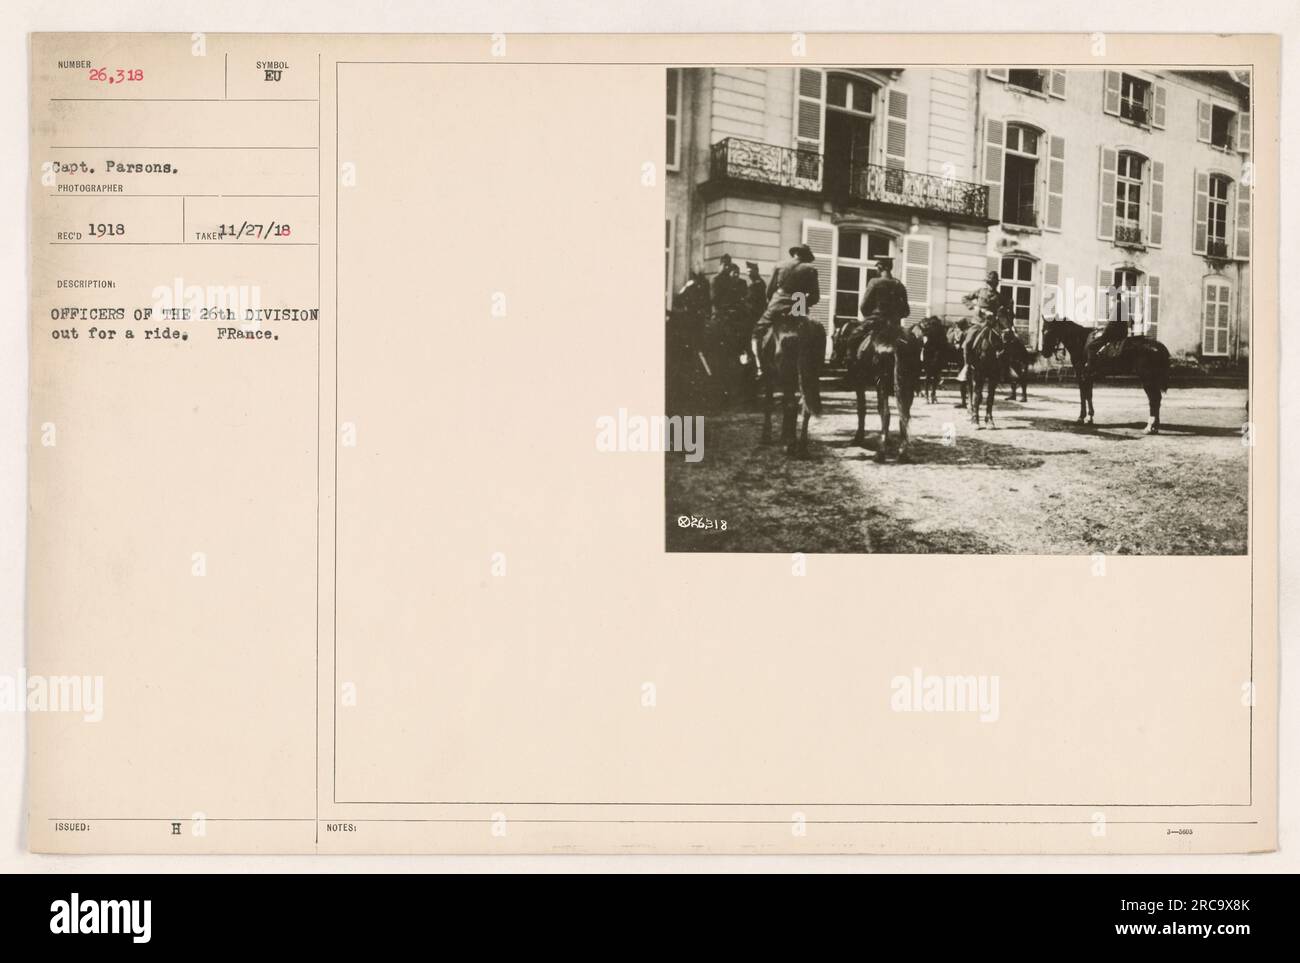 Capt. Parsons, a photographer during World War One, captured this image (#26,318) of officers from the 26th Division enjoying a ride on horseback in France. The photo was issued in Synsol EU in 1918. It is noted that the image was taxed on November 27, 1918, and there are additional notes written: 826318. Stock Photo